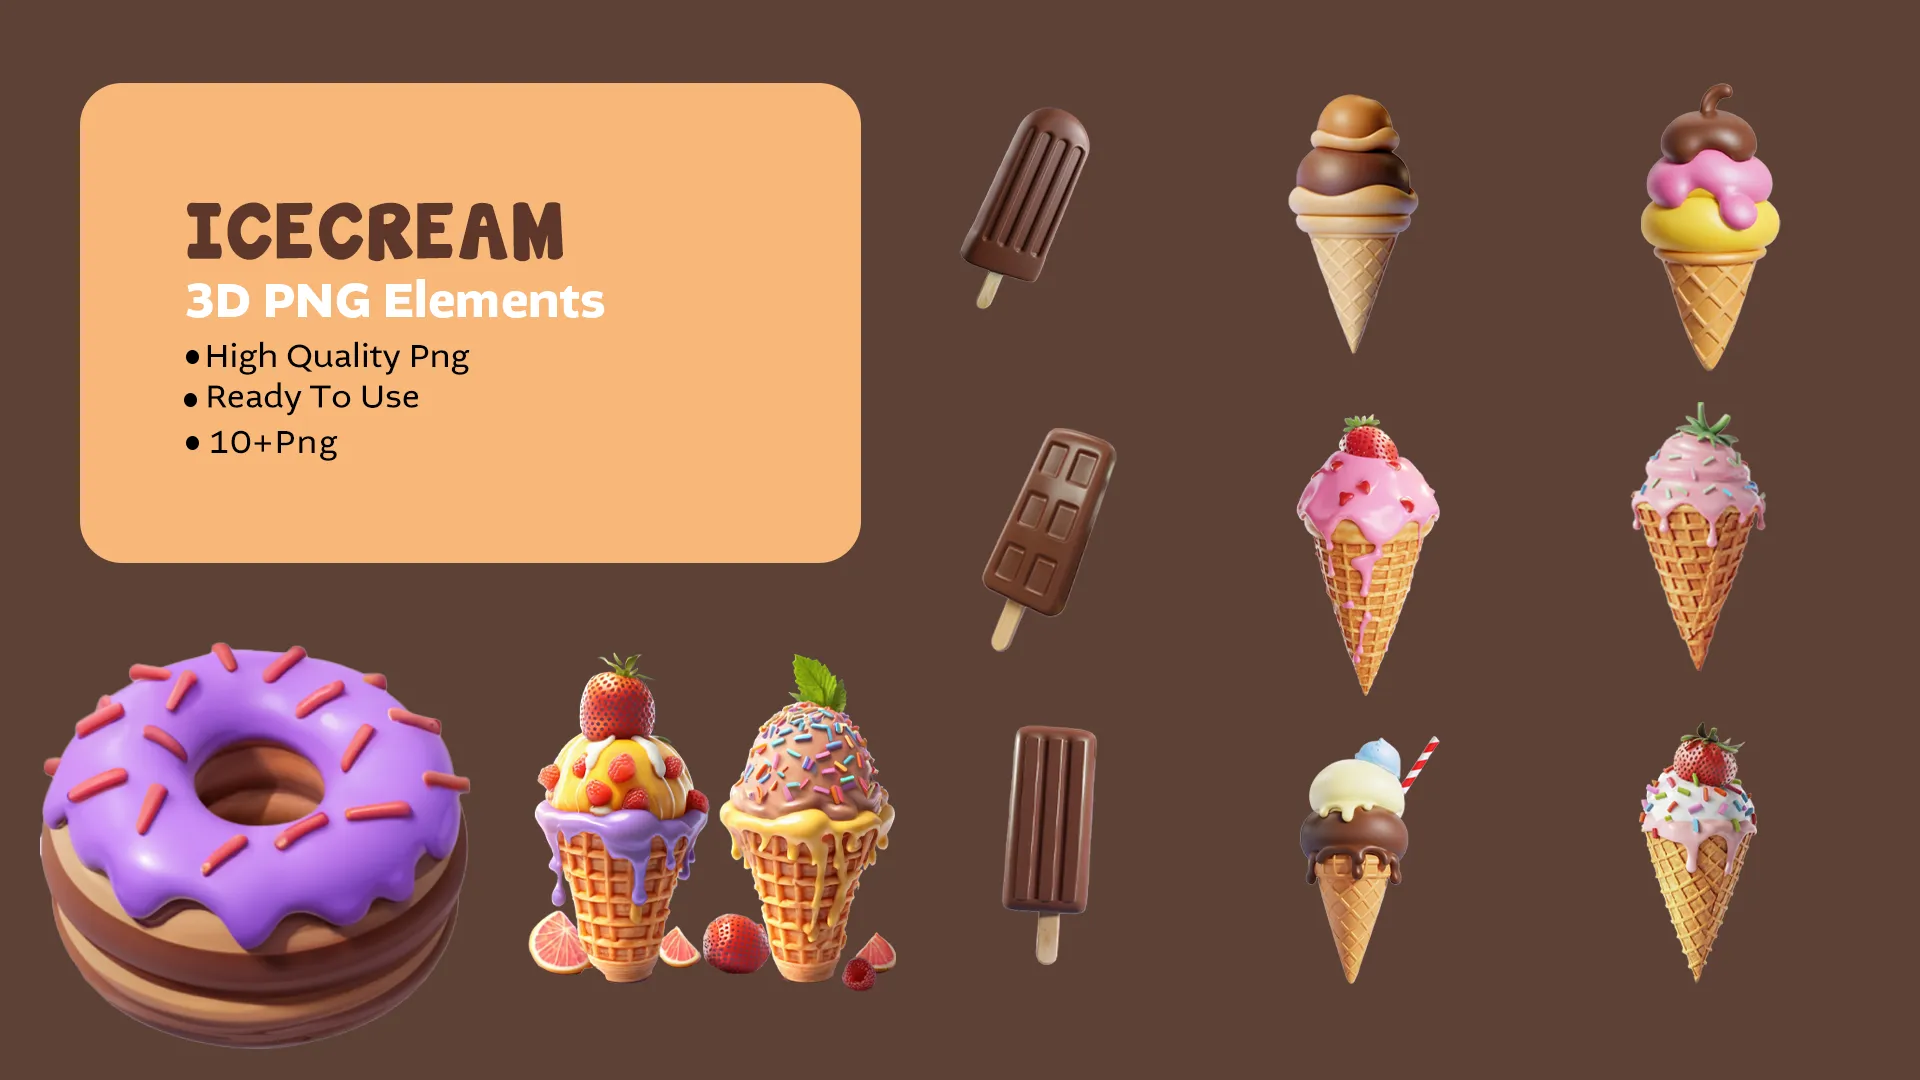 Delicious Ice Cream Varieties 3D Pack for Dessert Blogs image